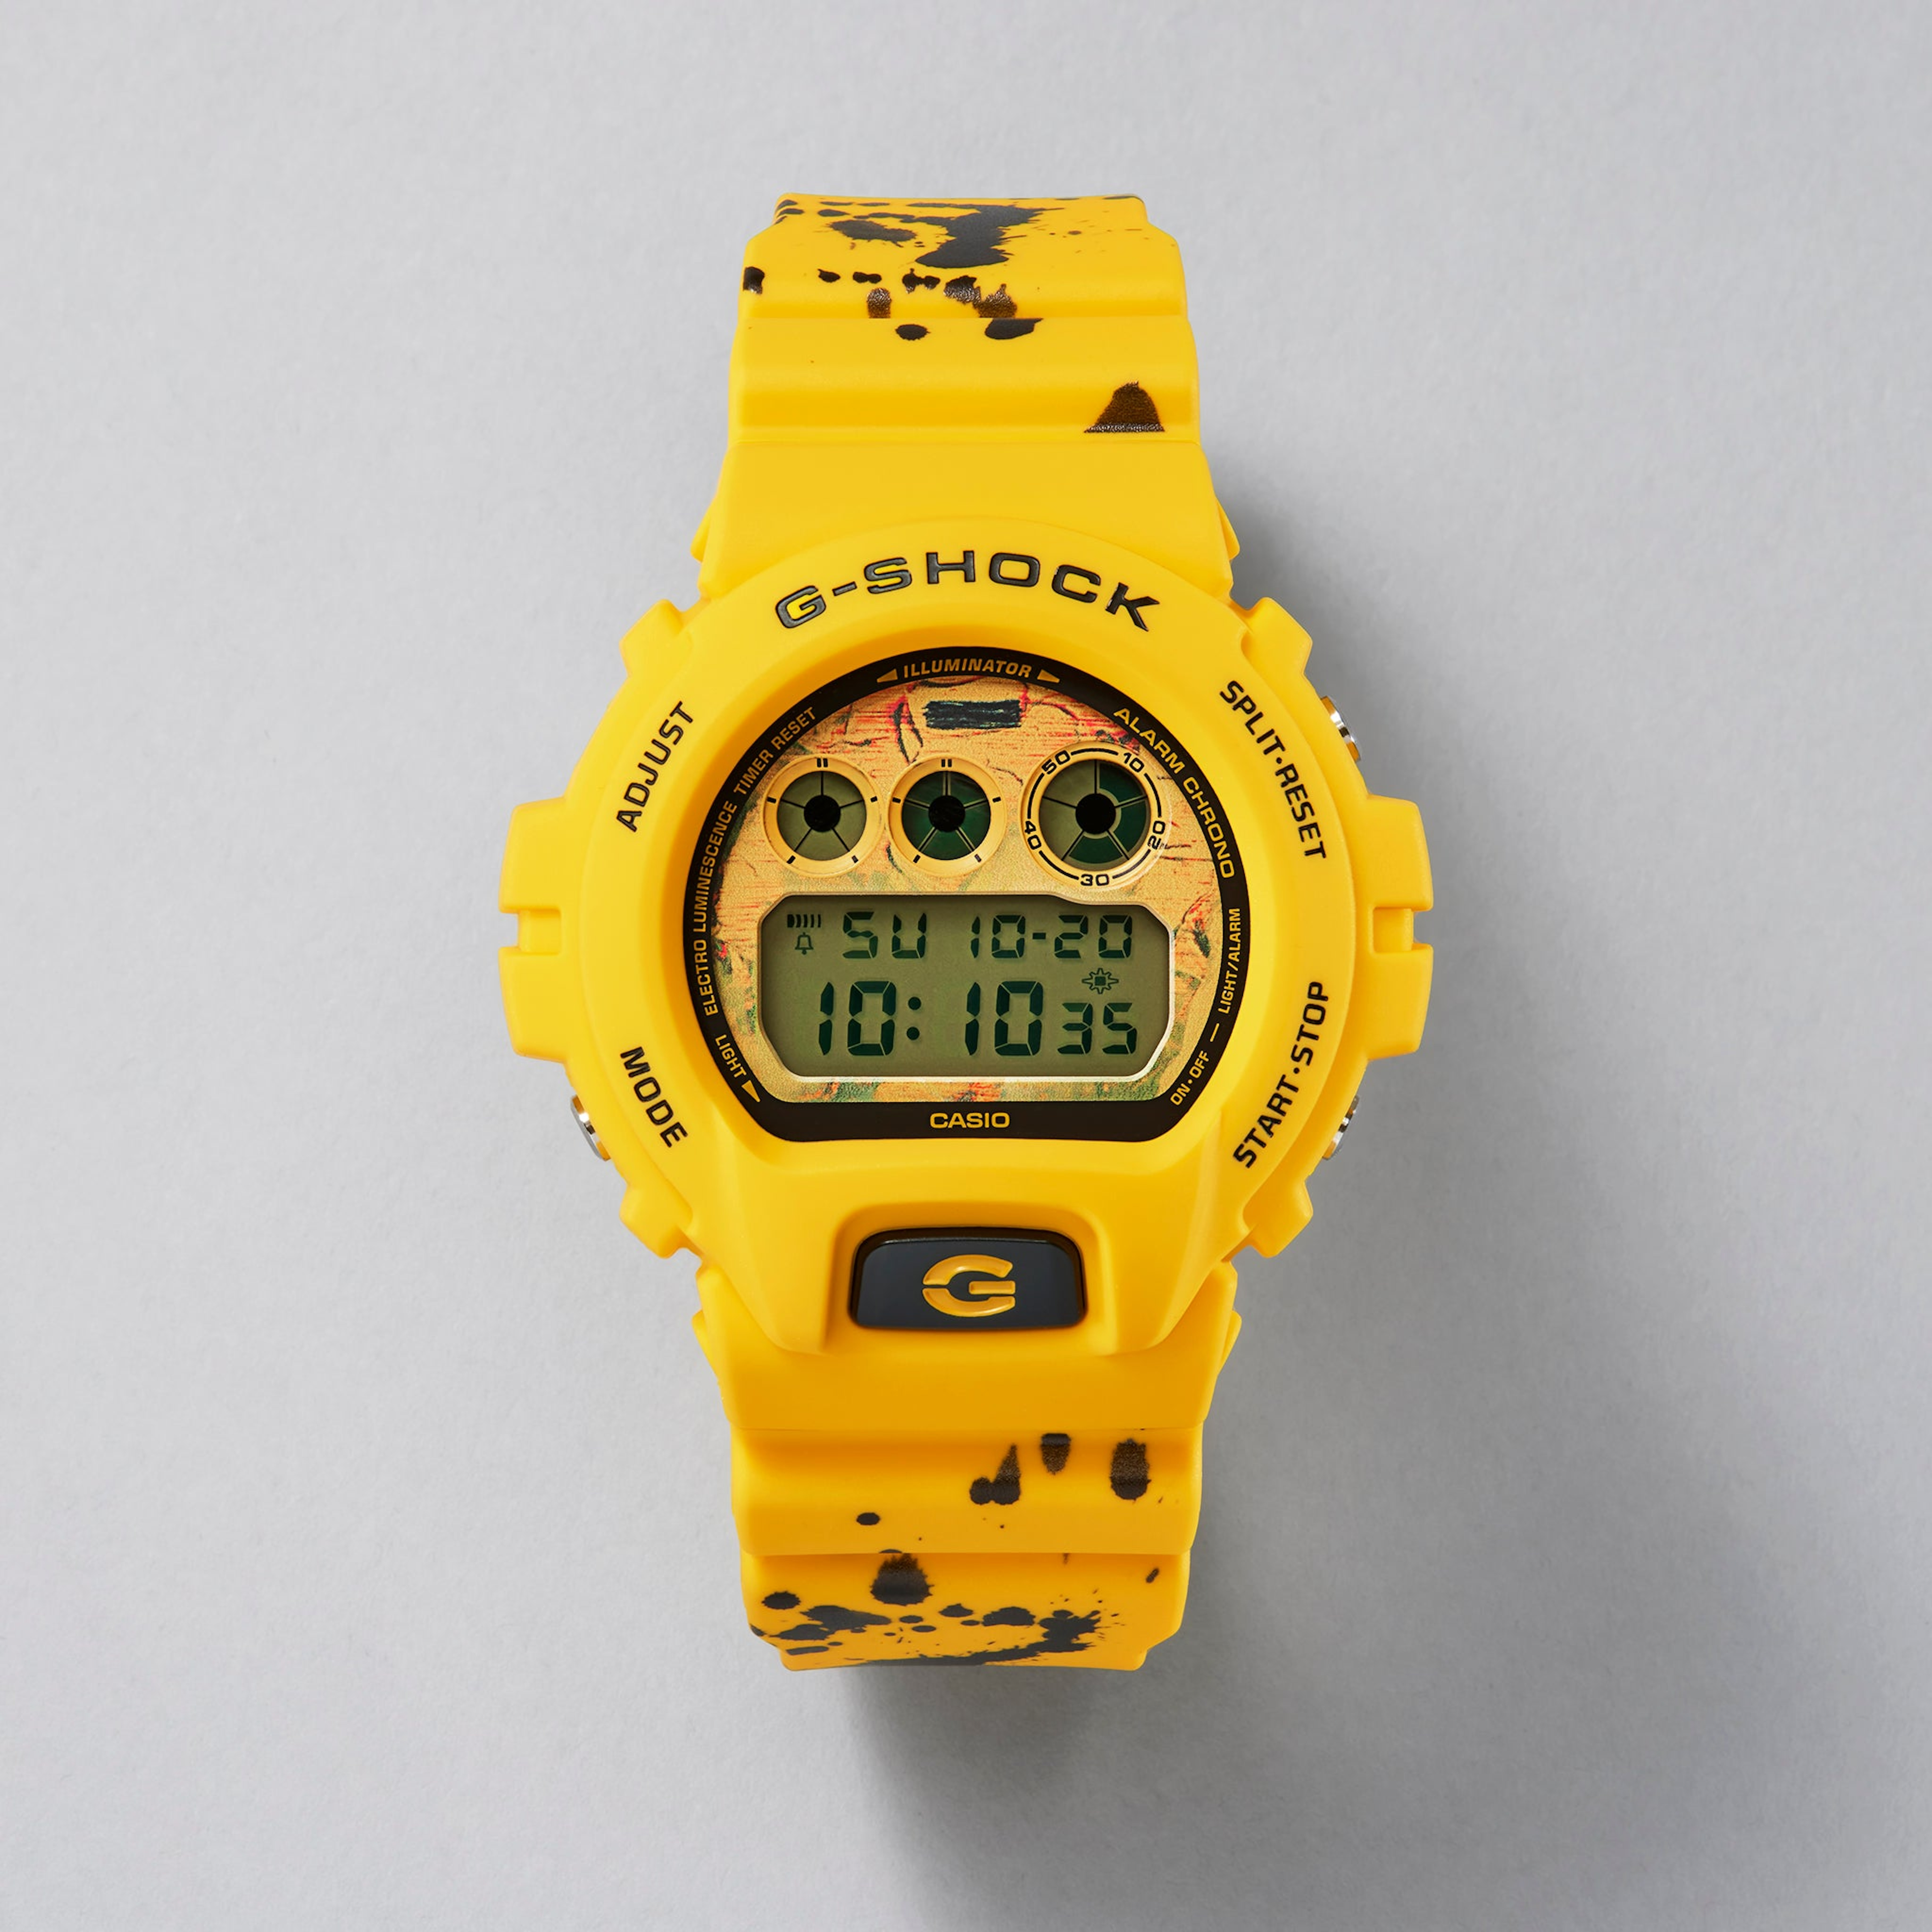 a look at Ed Sheeran's G-Shock watch in collaboration with Hodinkee and John Mayer